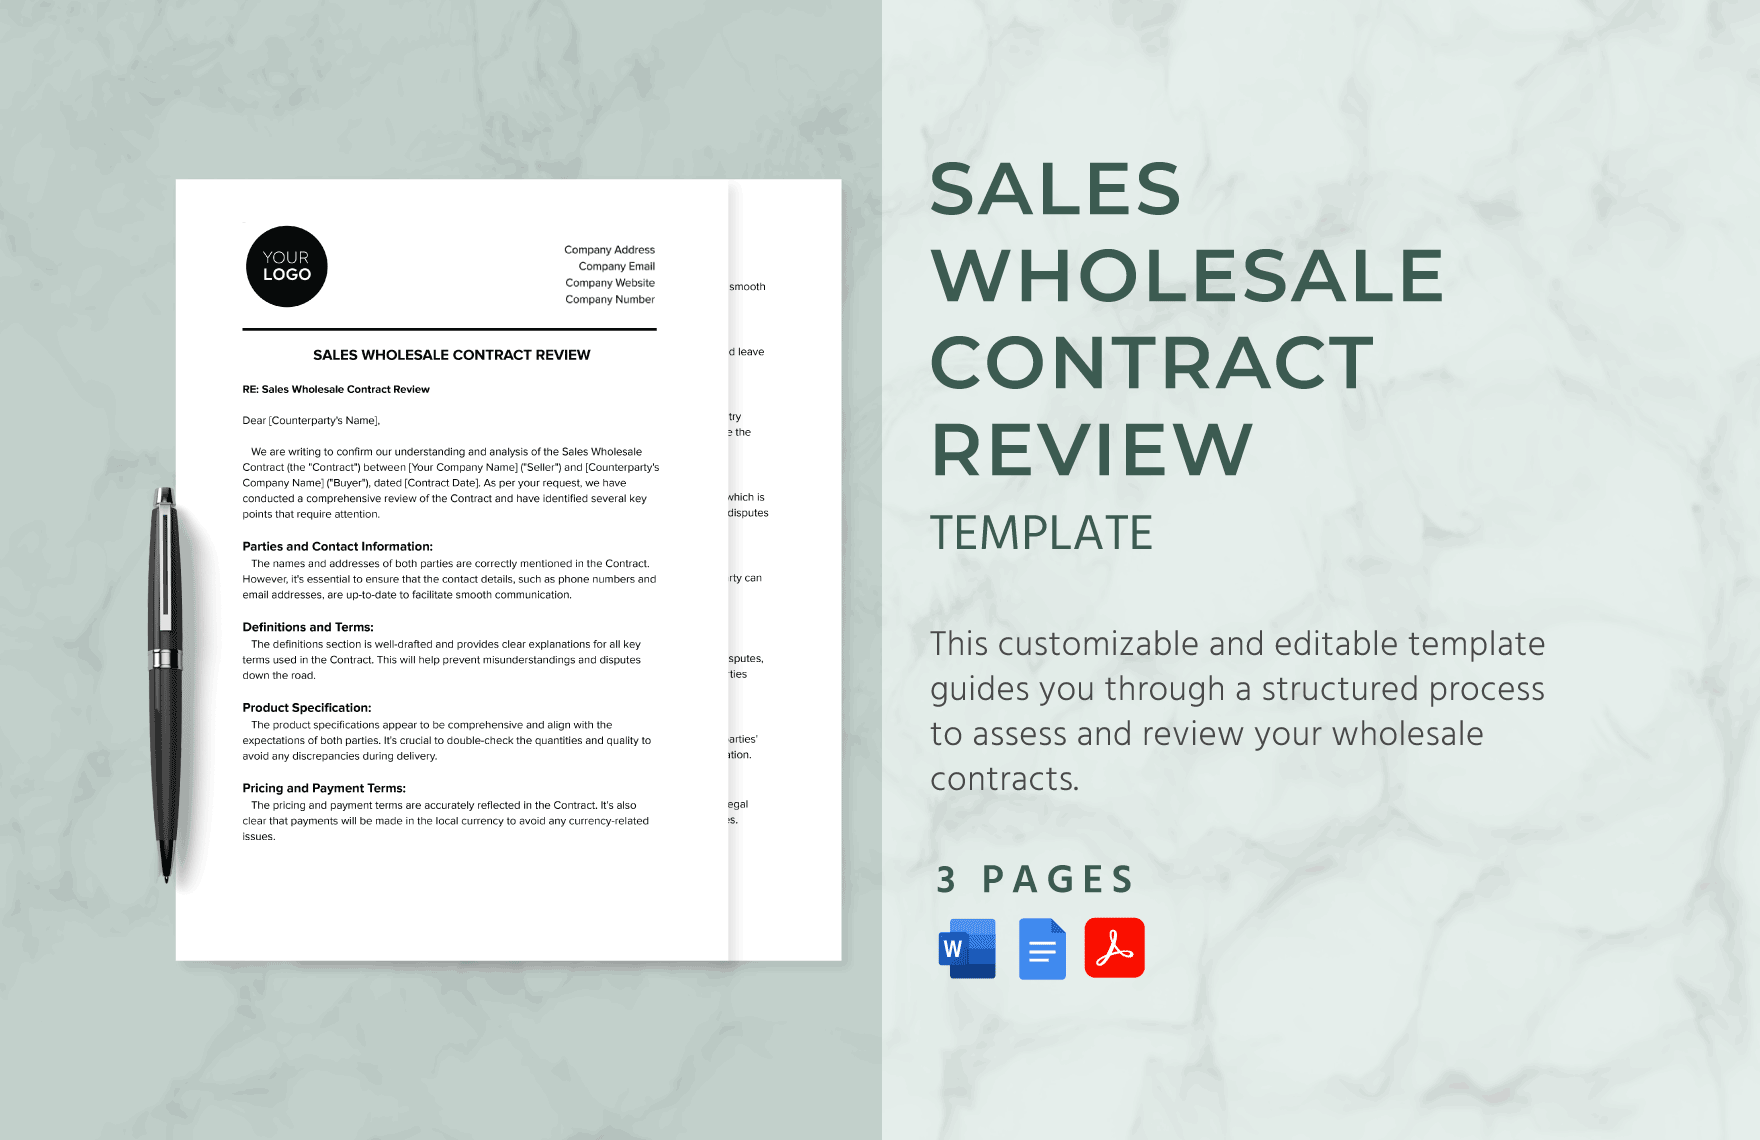 Sales Wholesale Contract Review Template in Word, Google Docs, PDF